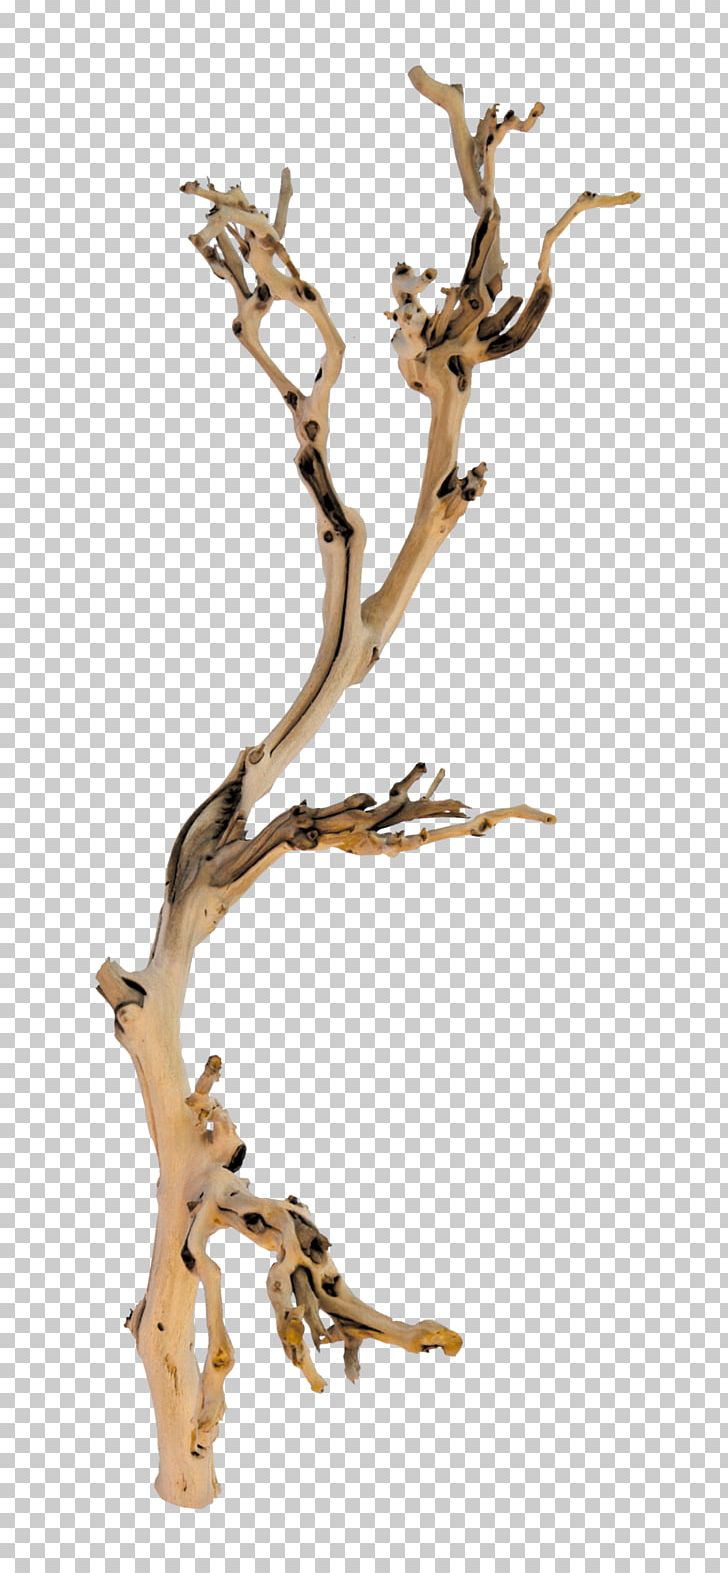 Branch Tree Twig Wood PNG, Clipart, Branch, Forest, Nature, Plant, Root Free PNG Download